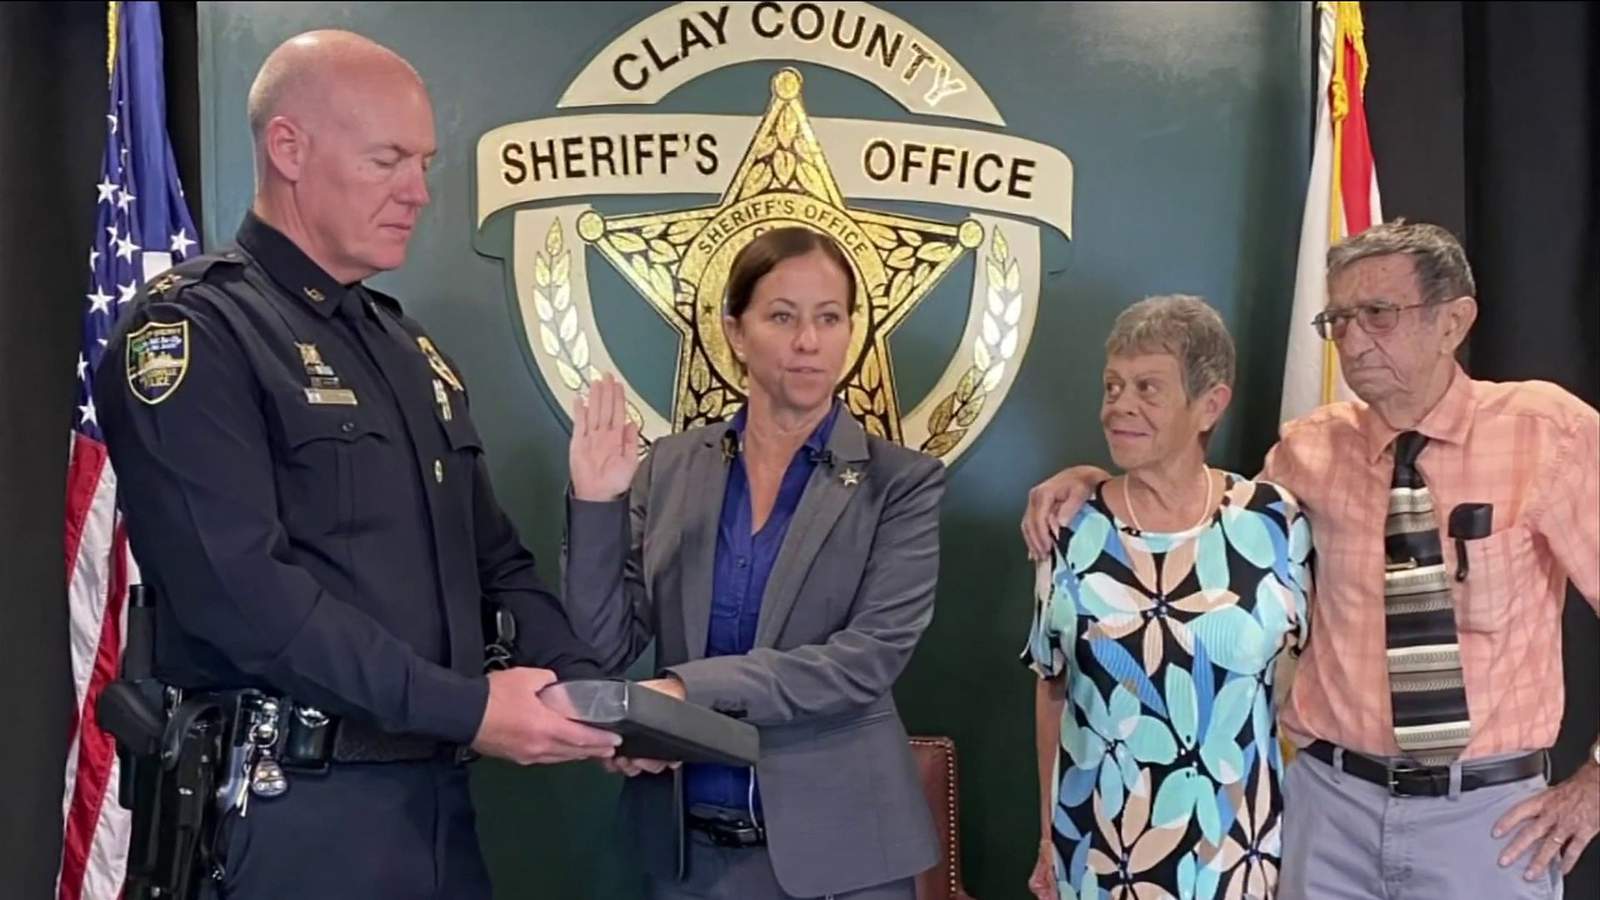 Head start: Gov. DeSantis appoints Cook as Clay County Sheriff